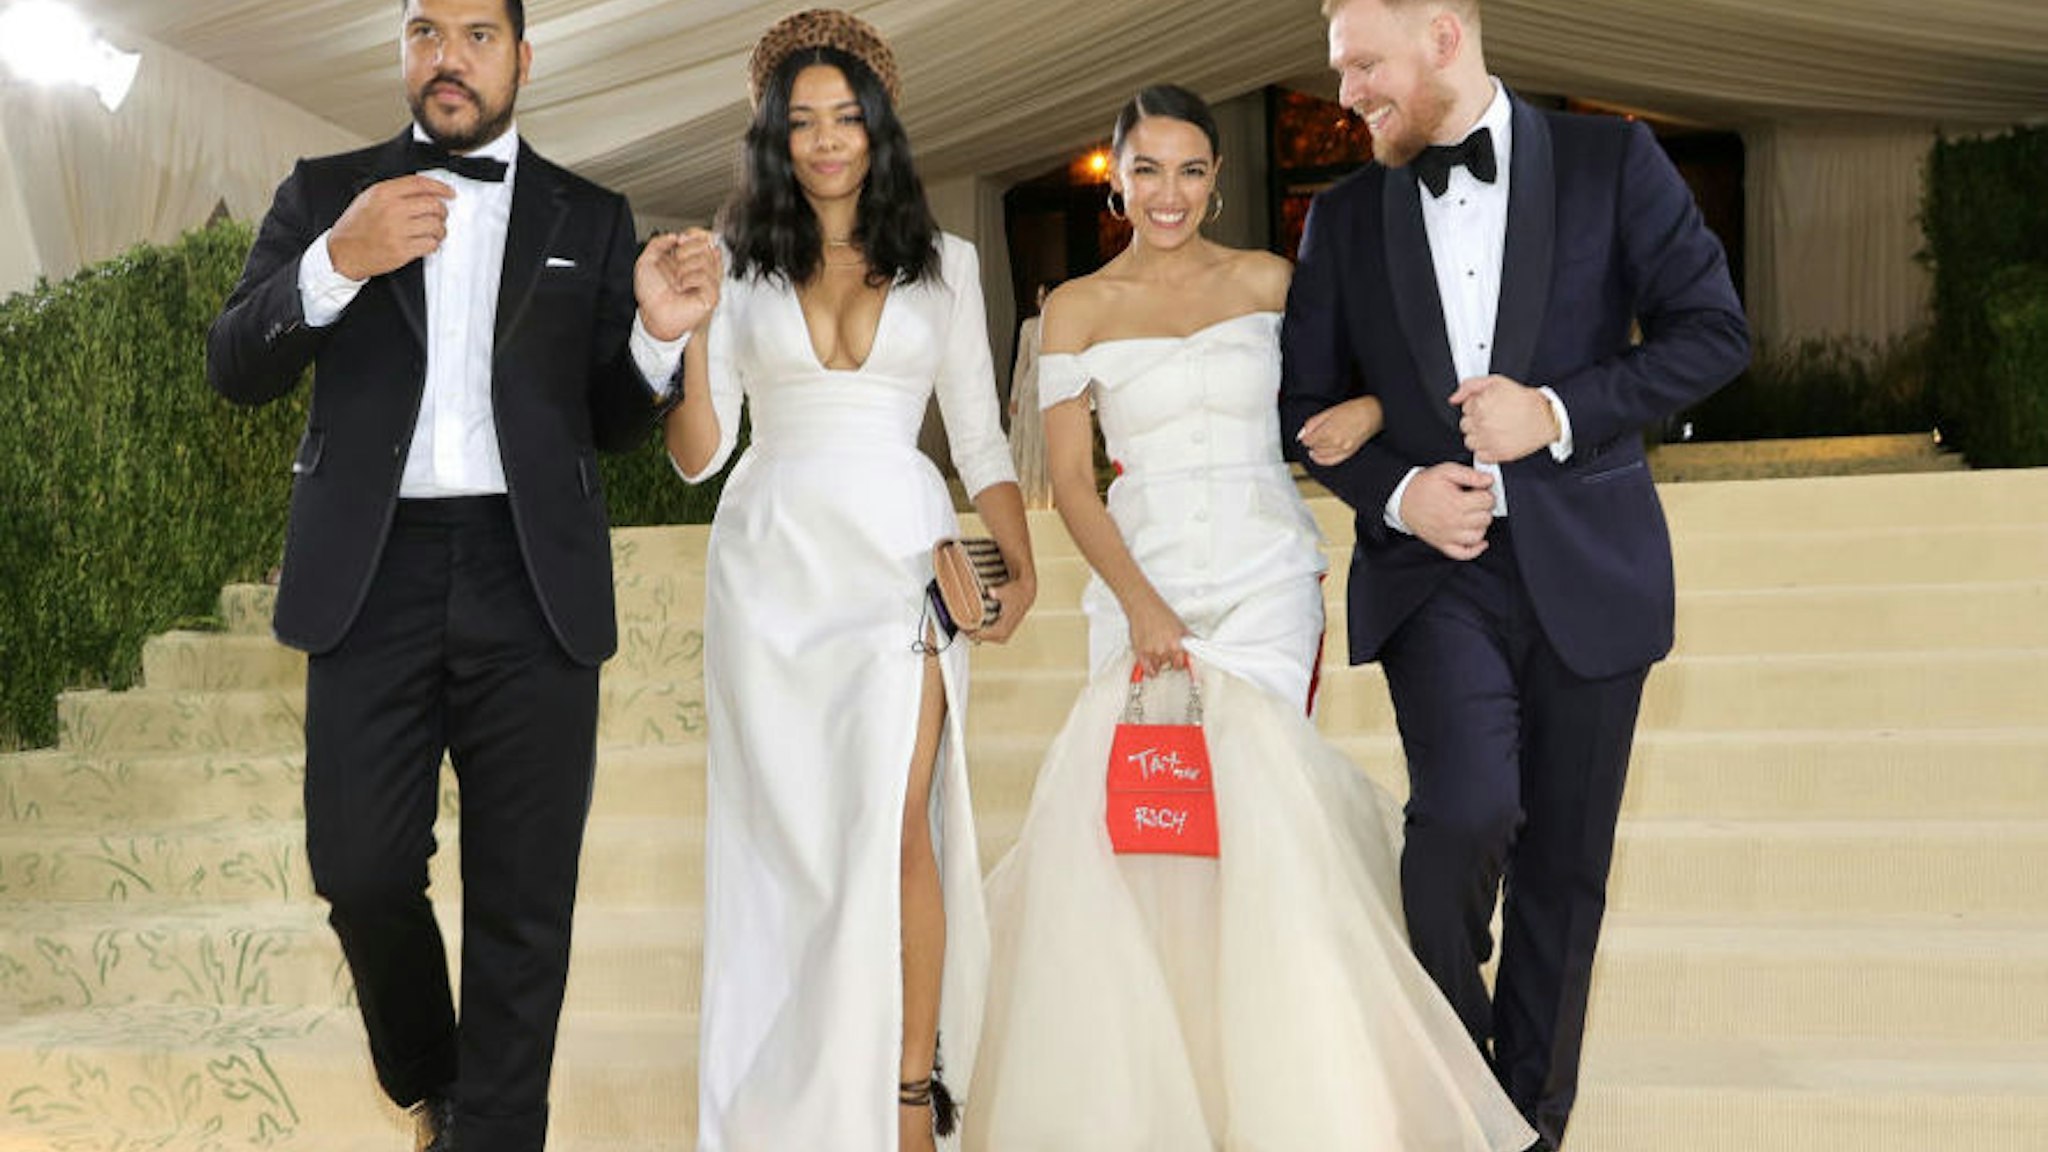 Benjamin Bronfman, Aurora James, Alexandria Ocasio-Cortez and Riley Roberts depart The 2021 Met Gala Celebrating In America: A Lexicon Of Fashion at Metropolitan Museum of Art on September 13, 2021 in New York City.